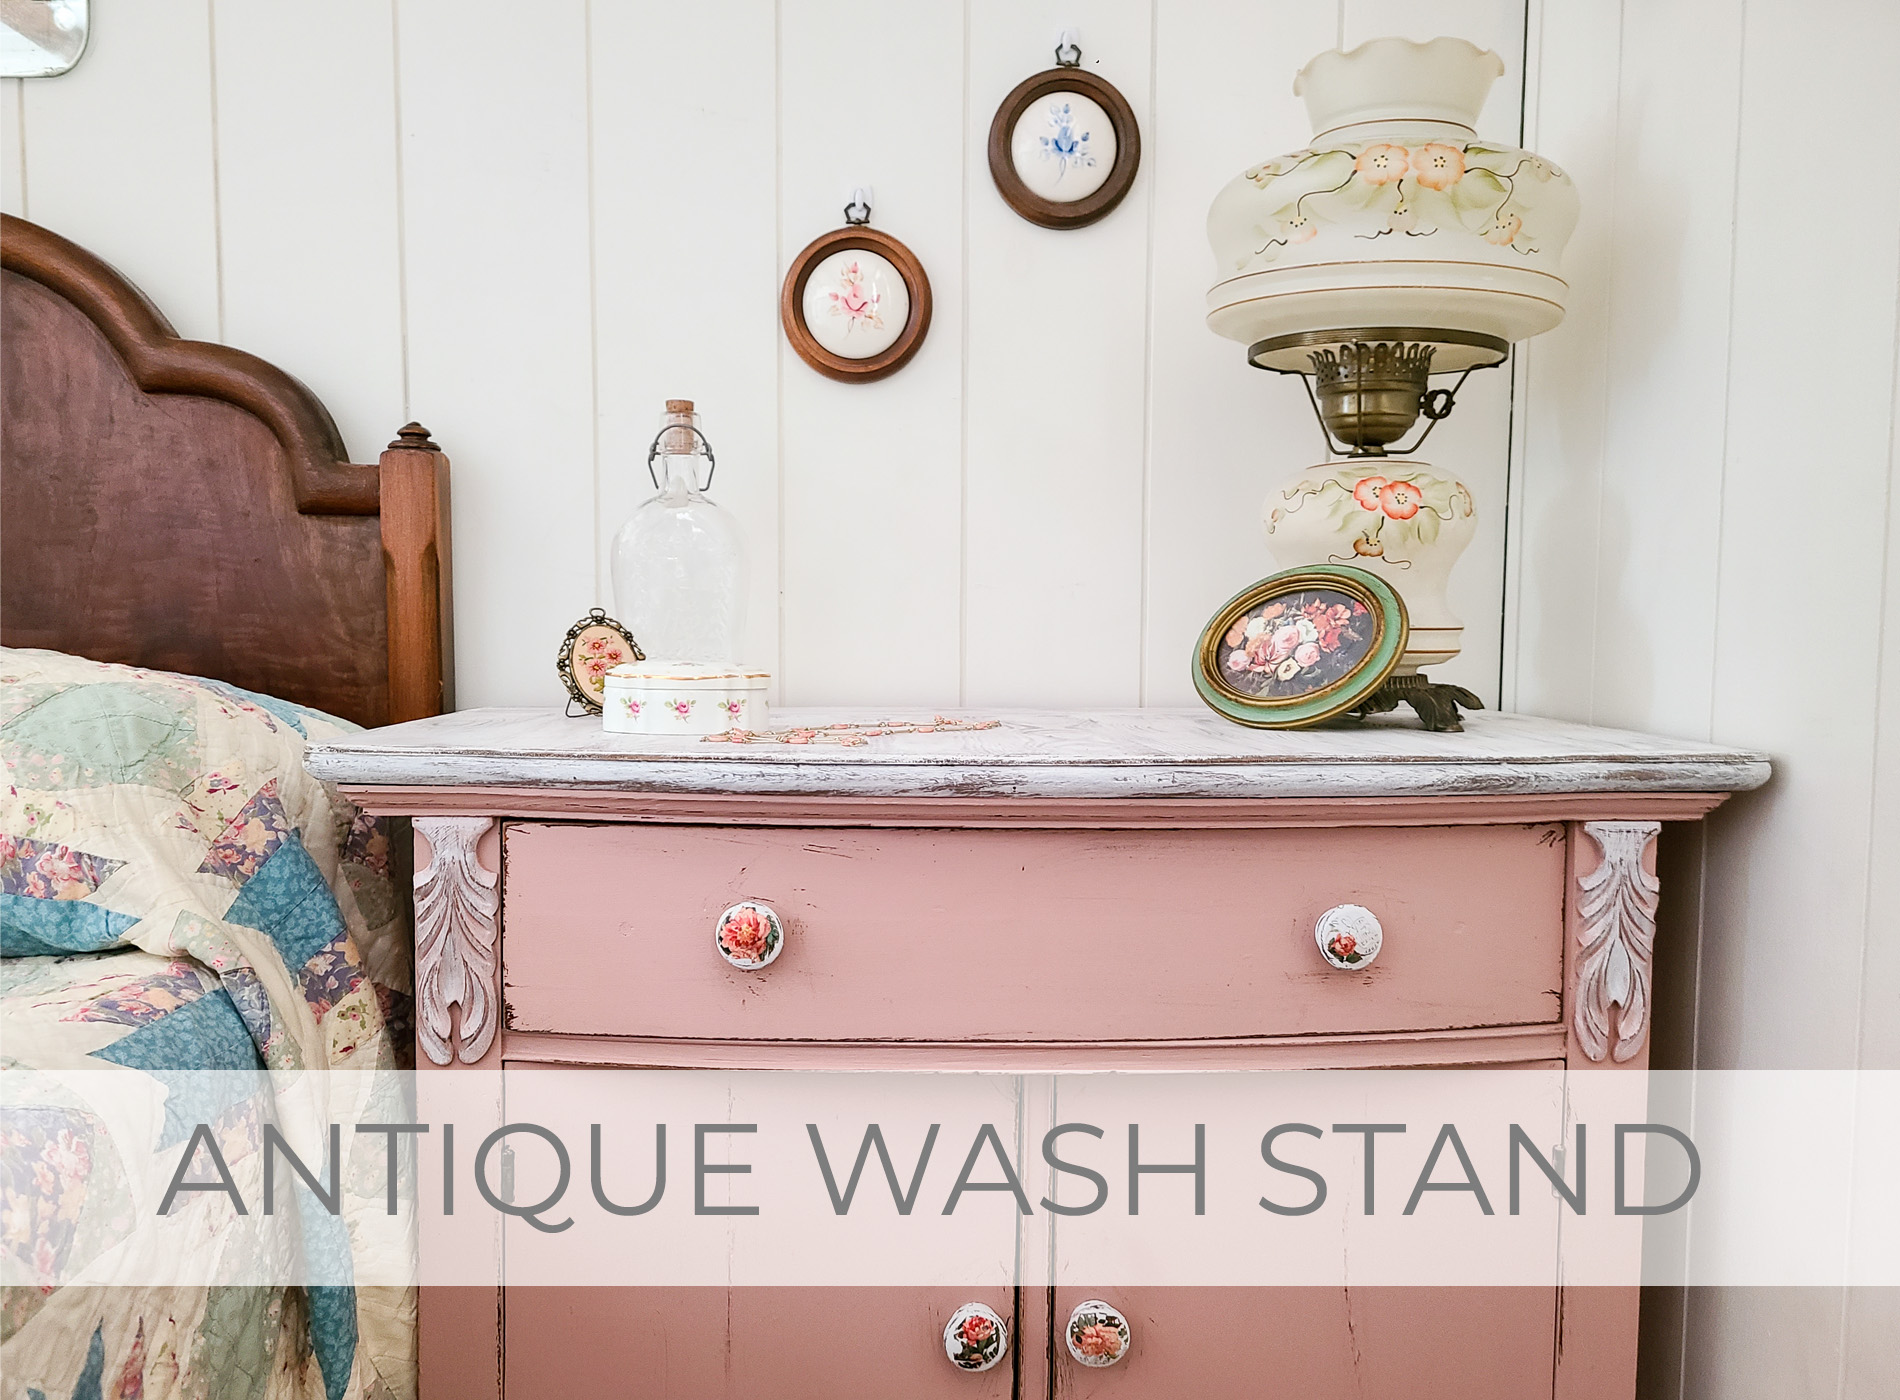 Antique Wash Stand in Pink by Larissa of Prodigal Pieces | prodigalpieces.com #prodigalpieces